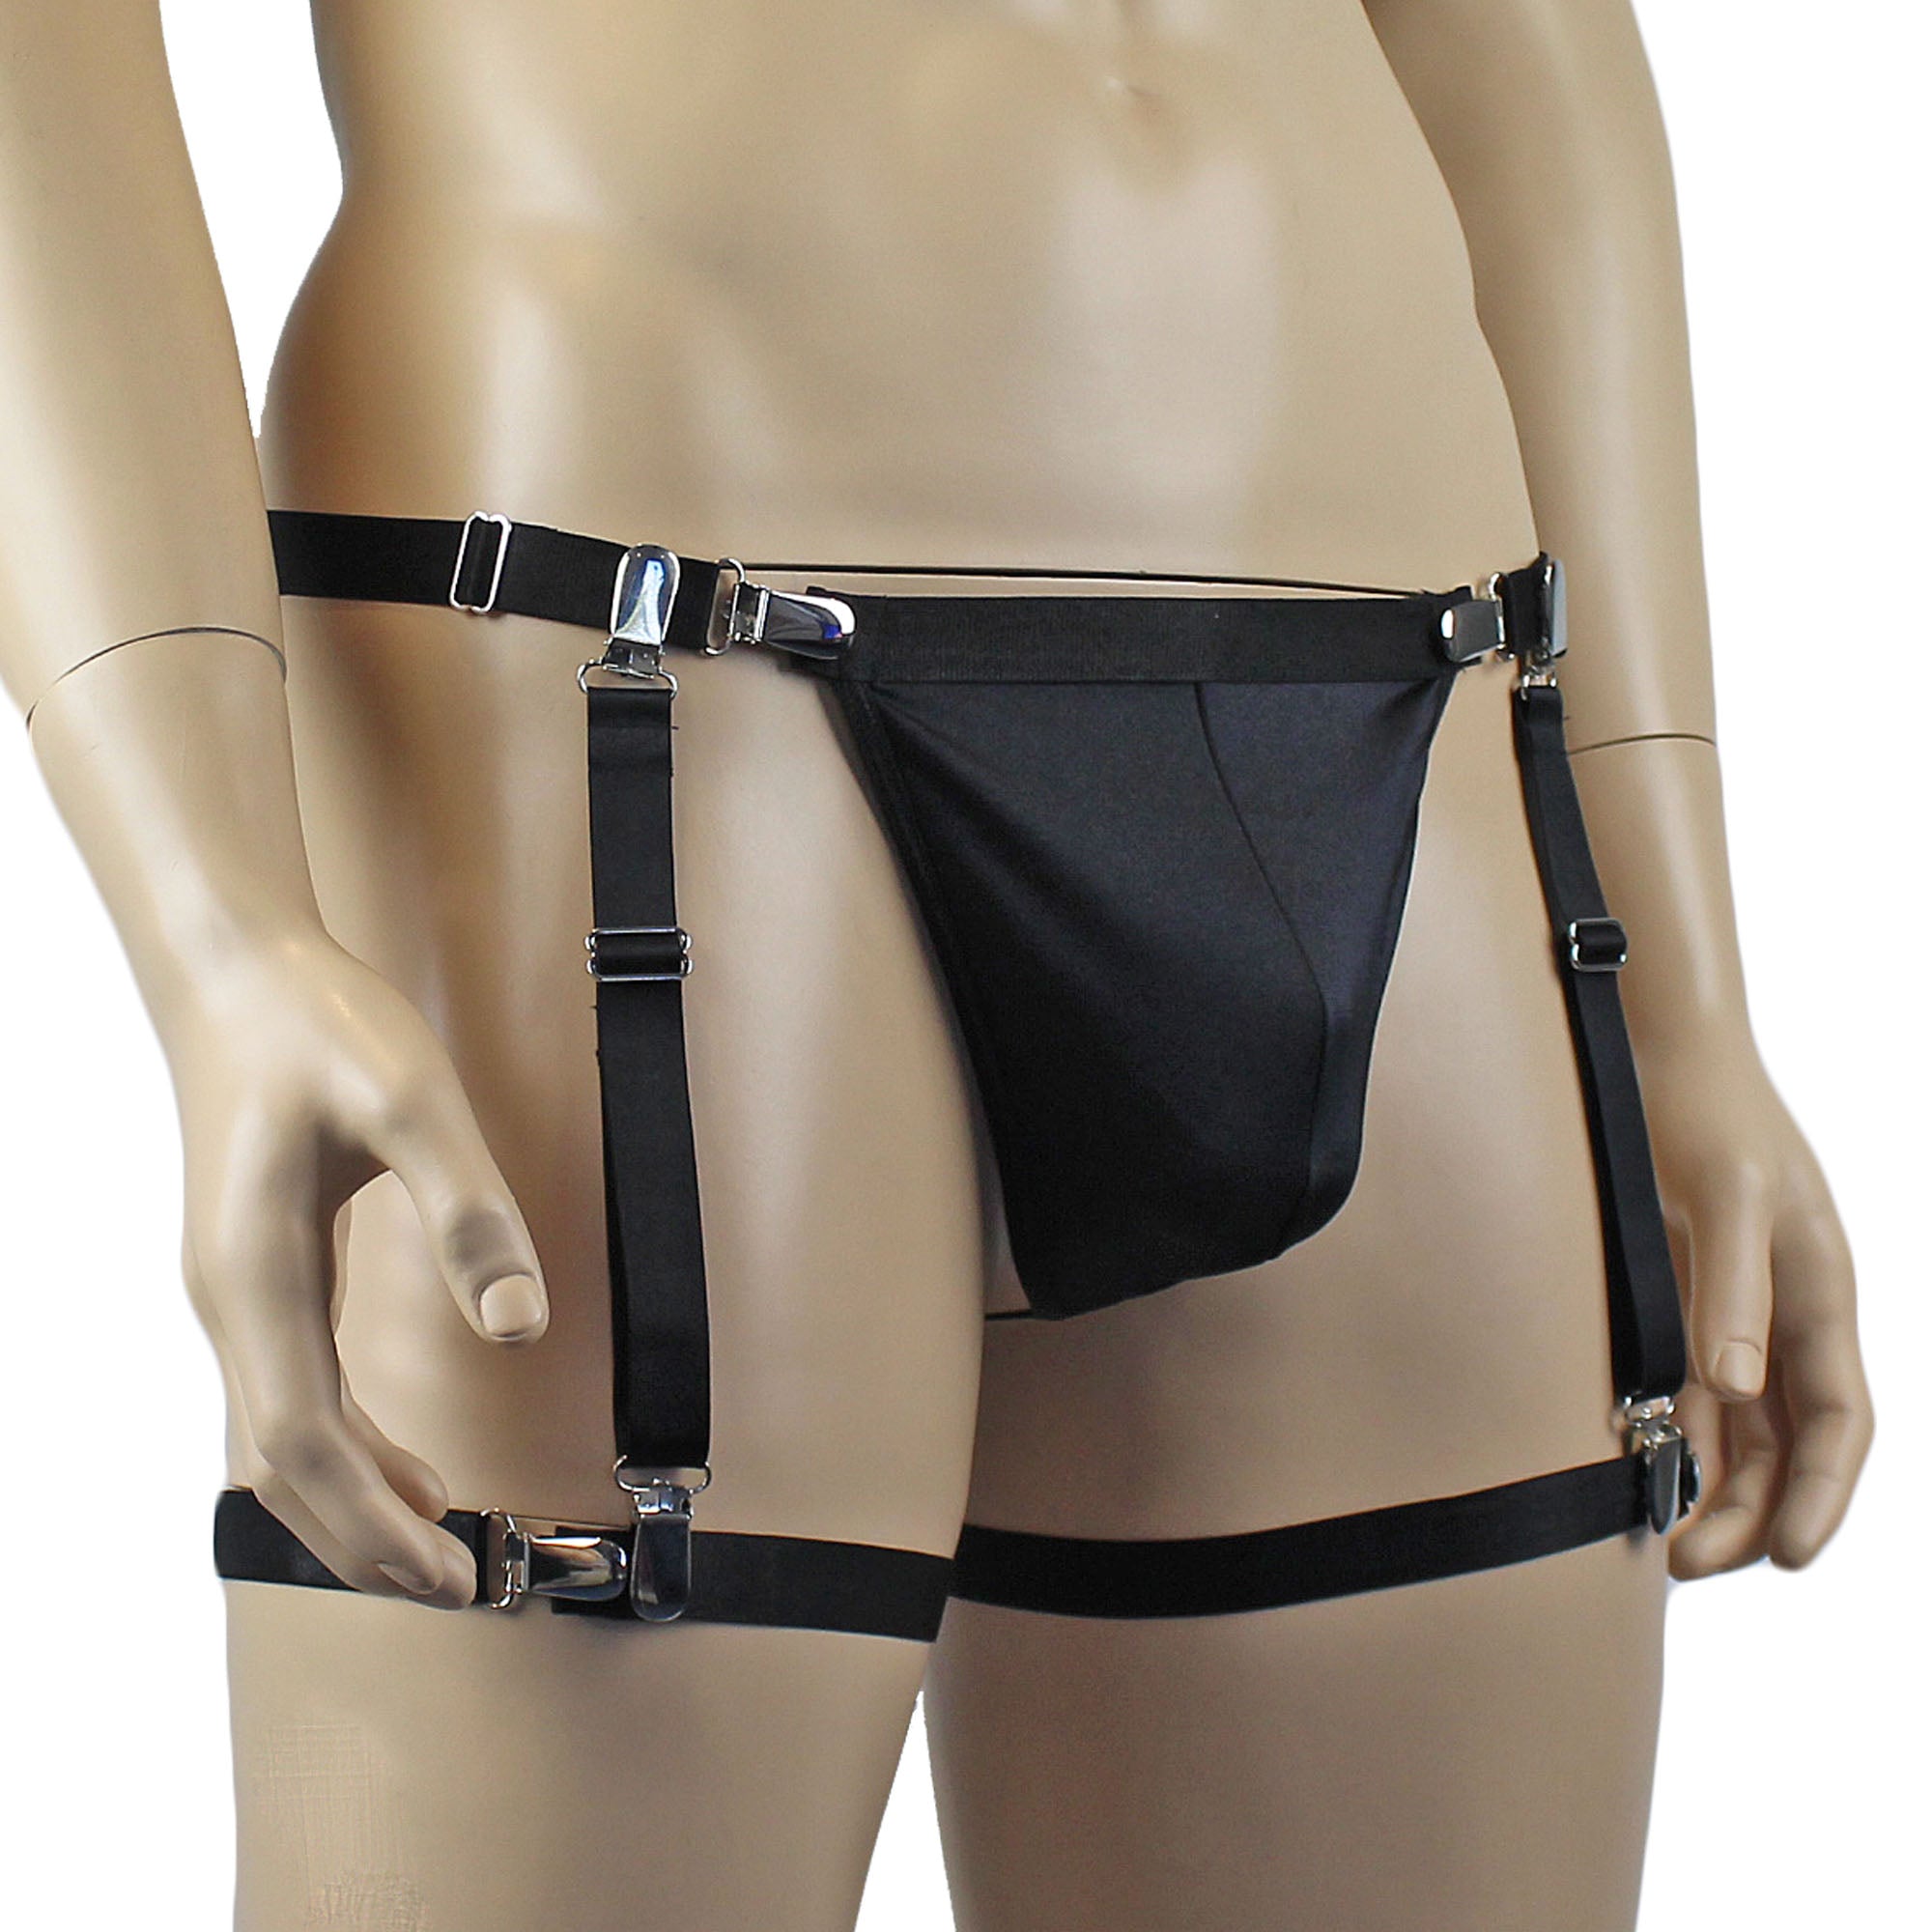 Mens Janice Thong with Adjustable Silver Clip Sides, Detachable Garters & Leg Bands Black